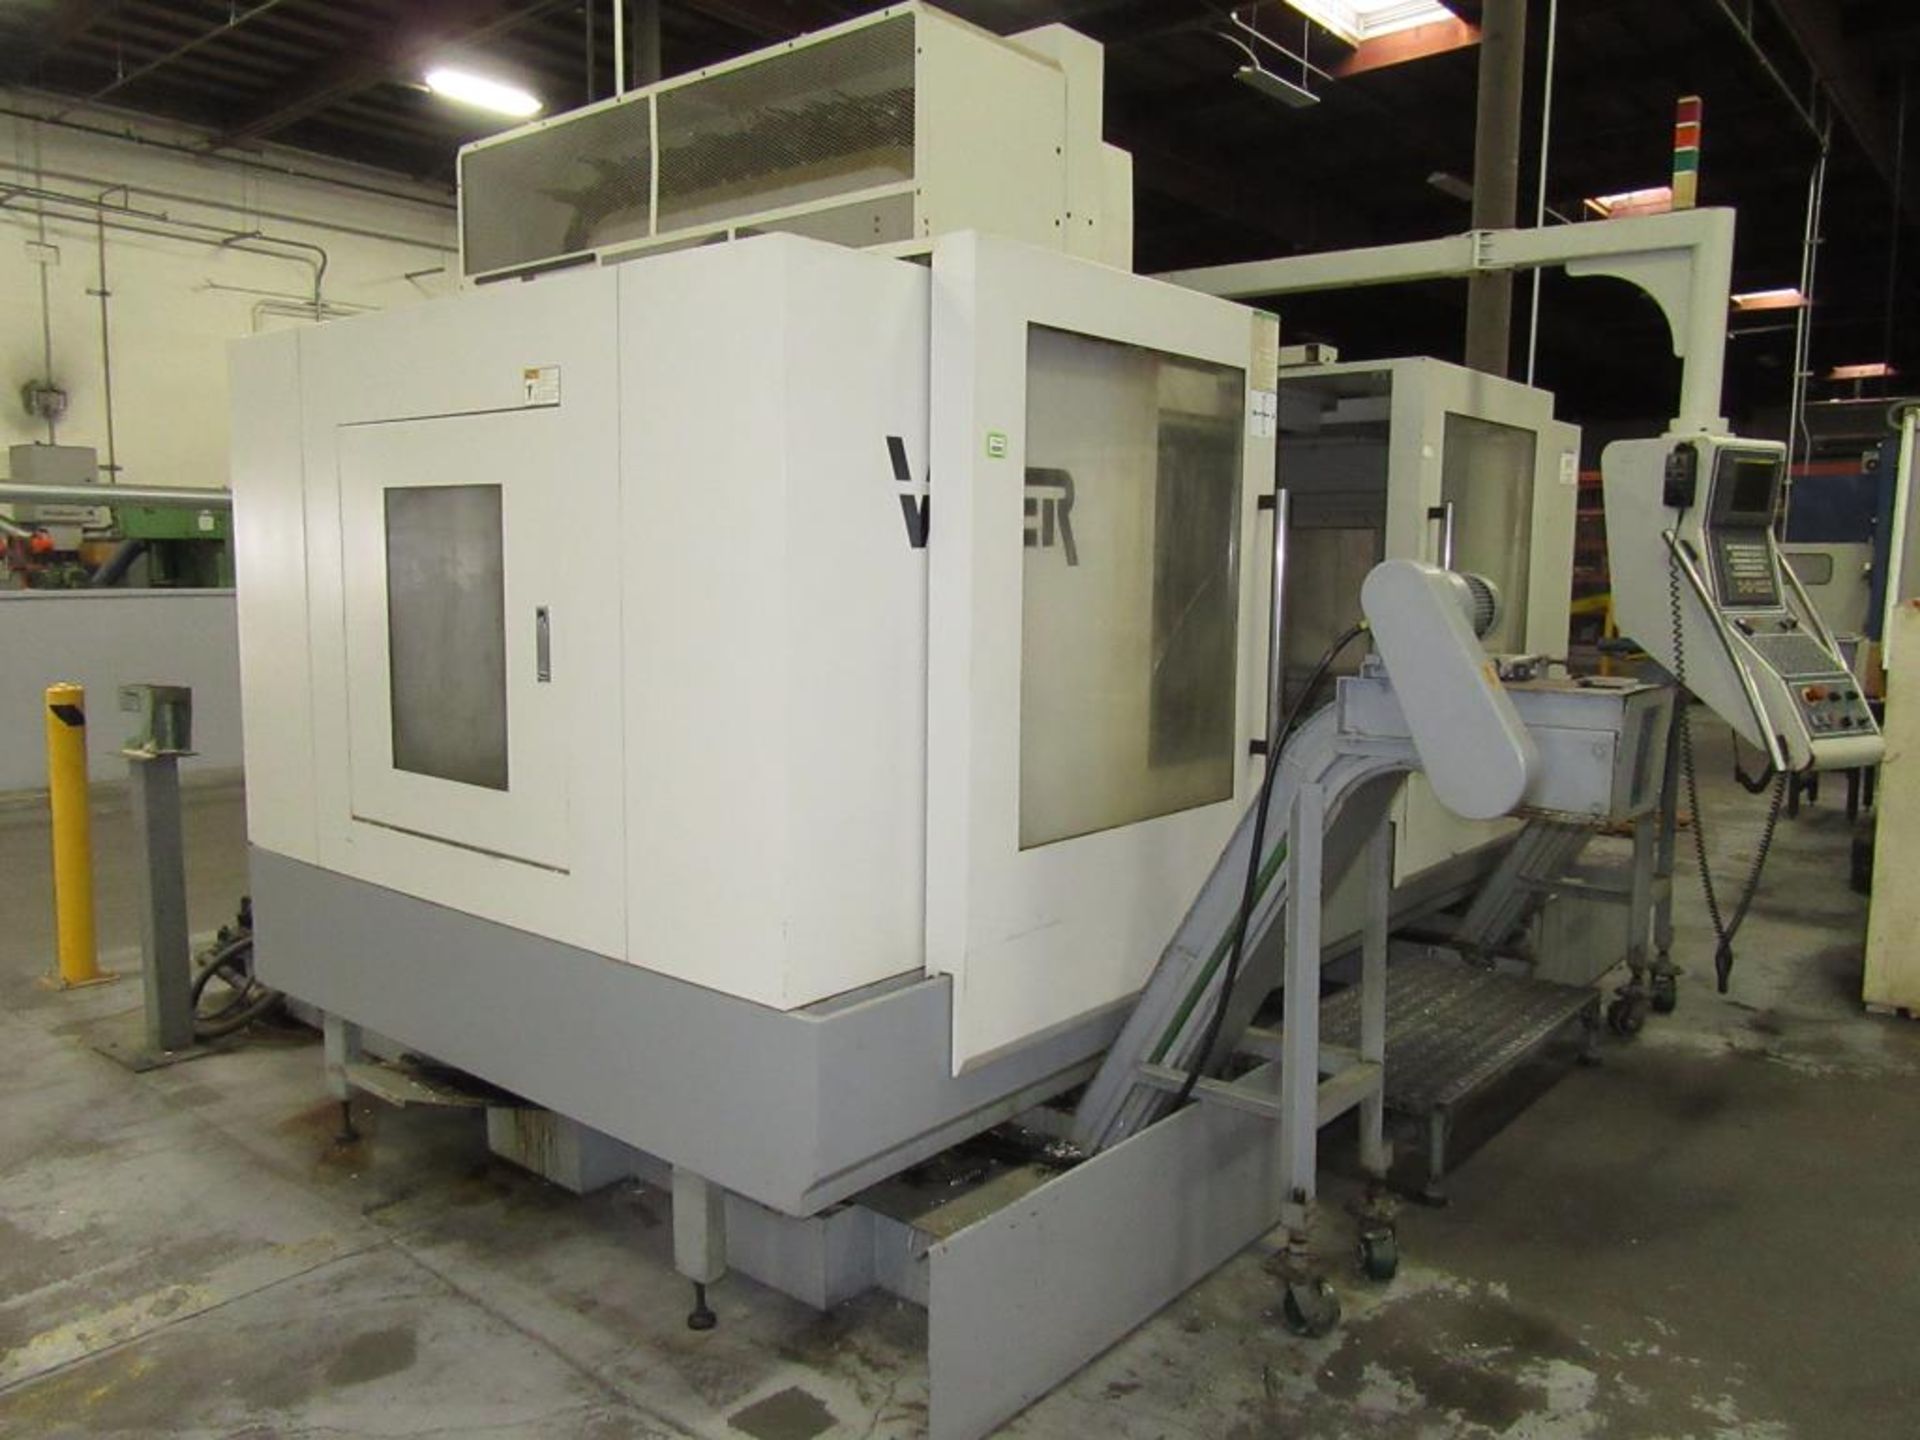 Mighty Viper VMC-1600A. 2006 - CNC Vertical Machining Center with Fanuc 21i-MB 3-Axis Control Panel, - Image 19 of 22